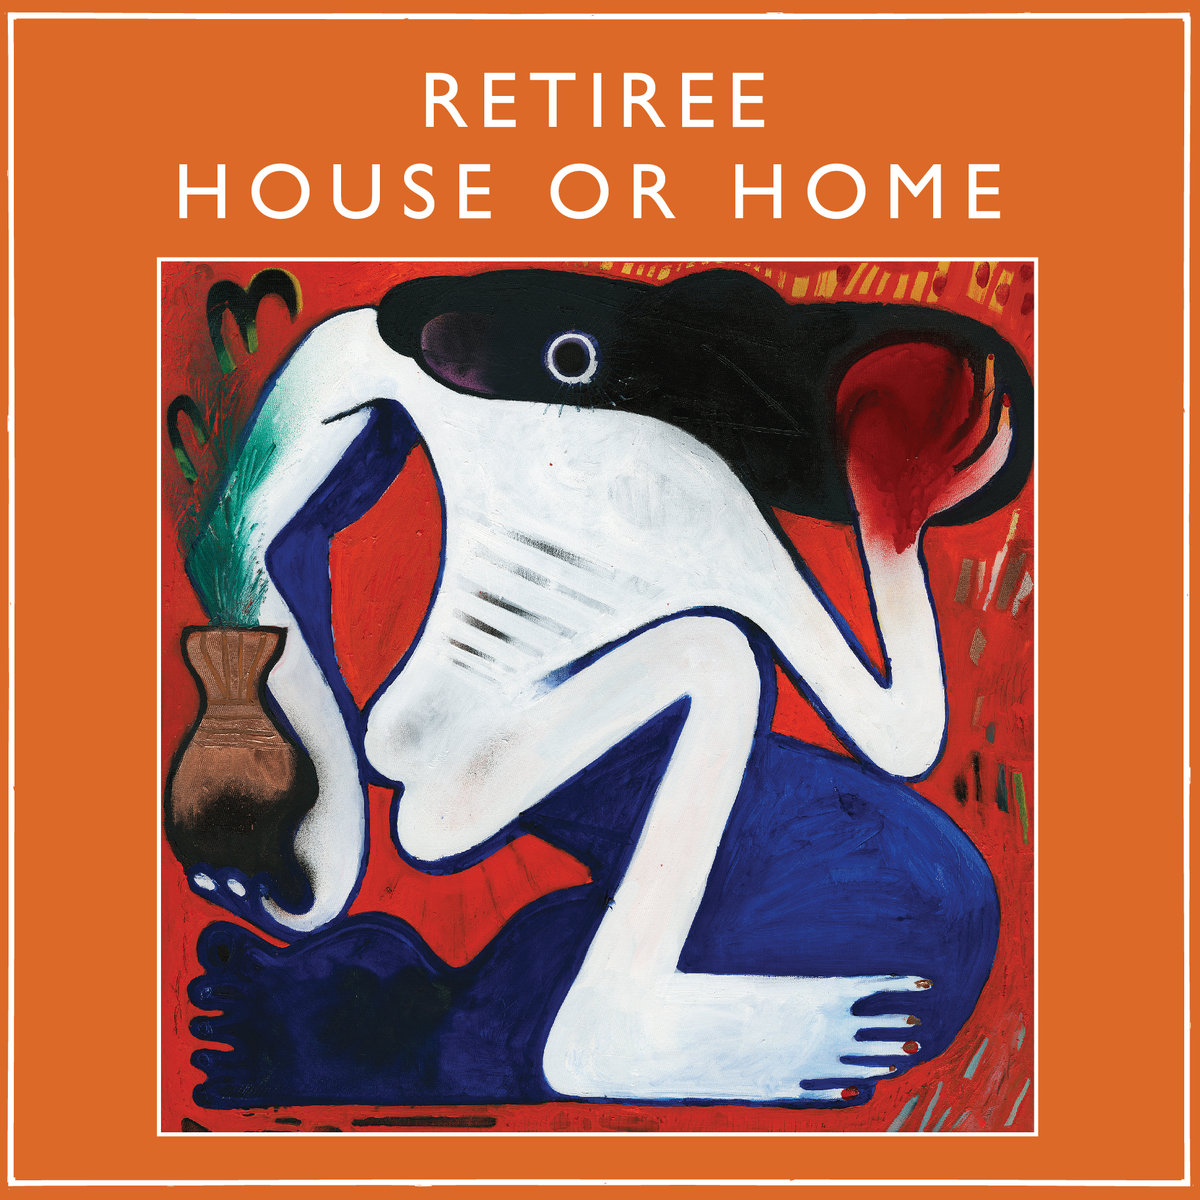 RETIREE / HOUSE OR HOME